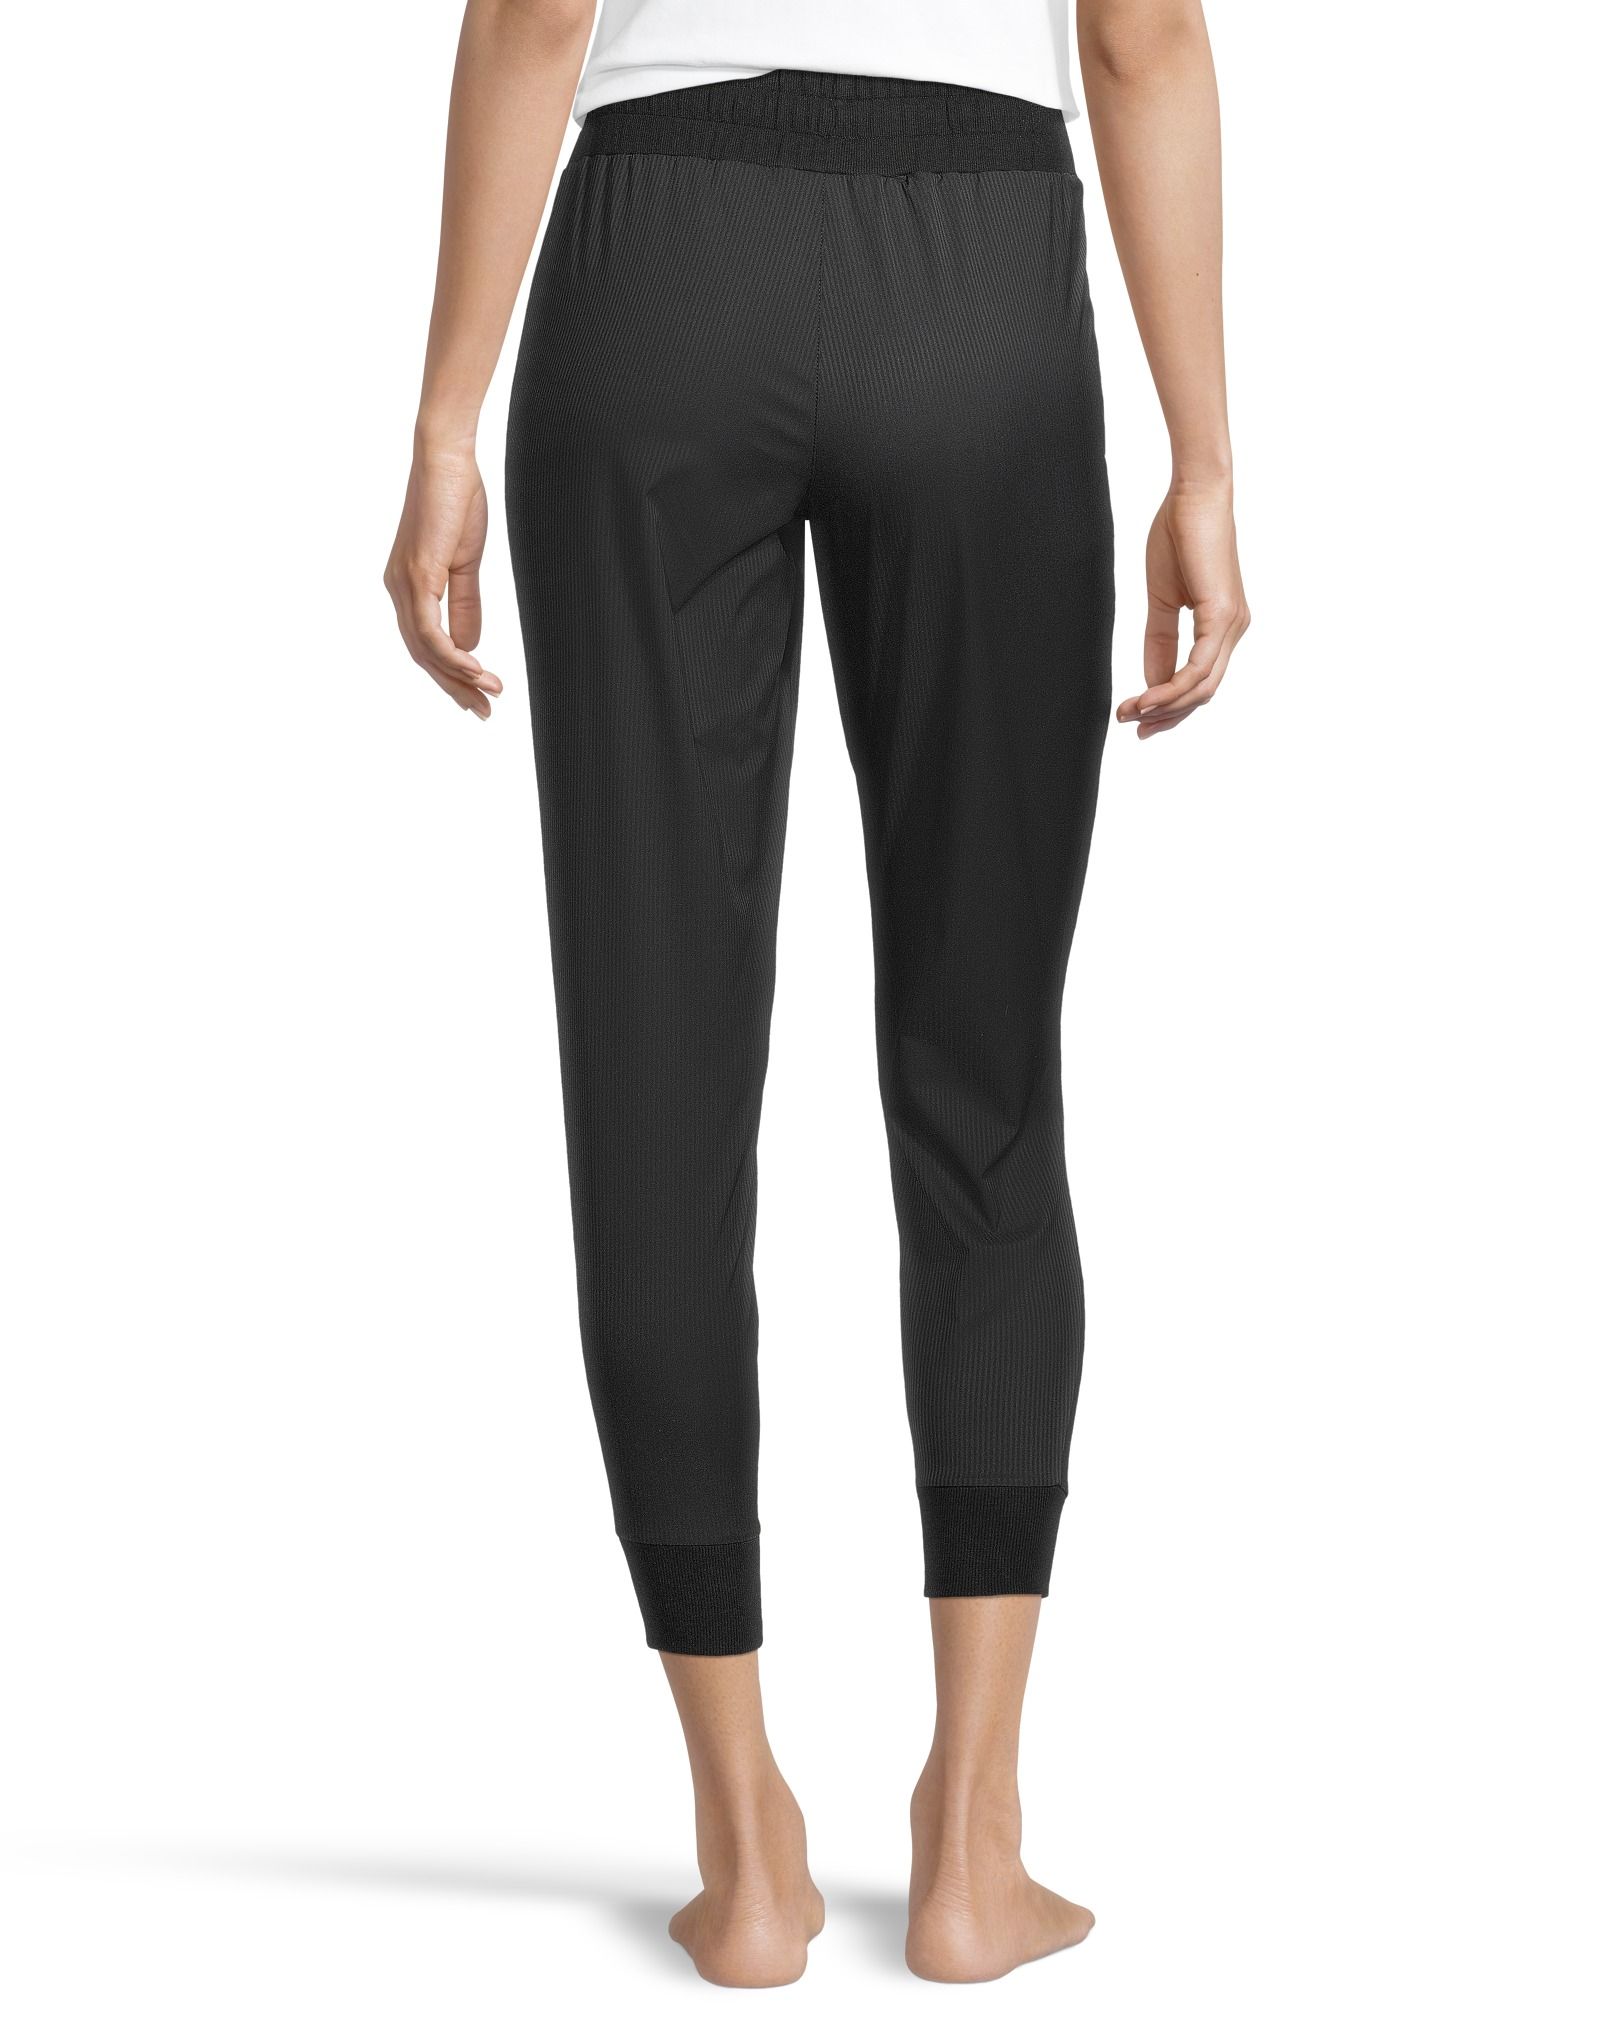 Athletic Works Athleisure Commuter Pants Bundle  Athletic works,  Streetwear fashion, Athleisure